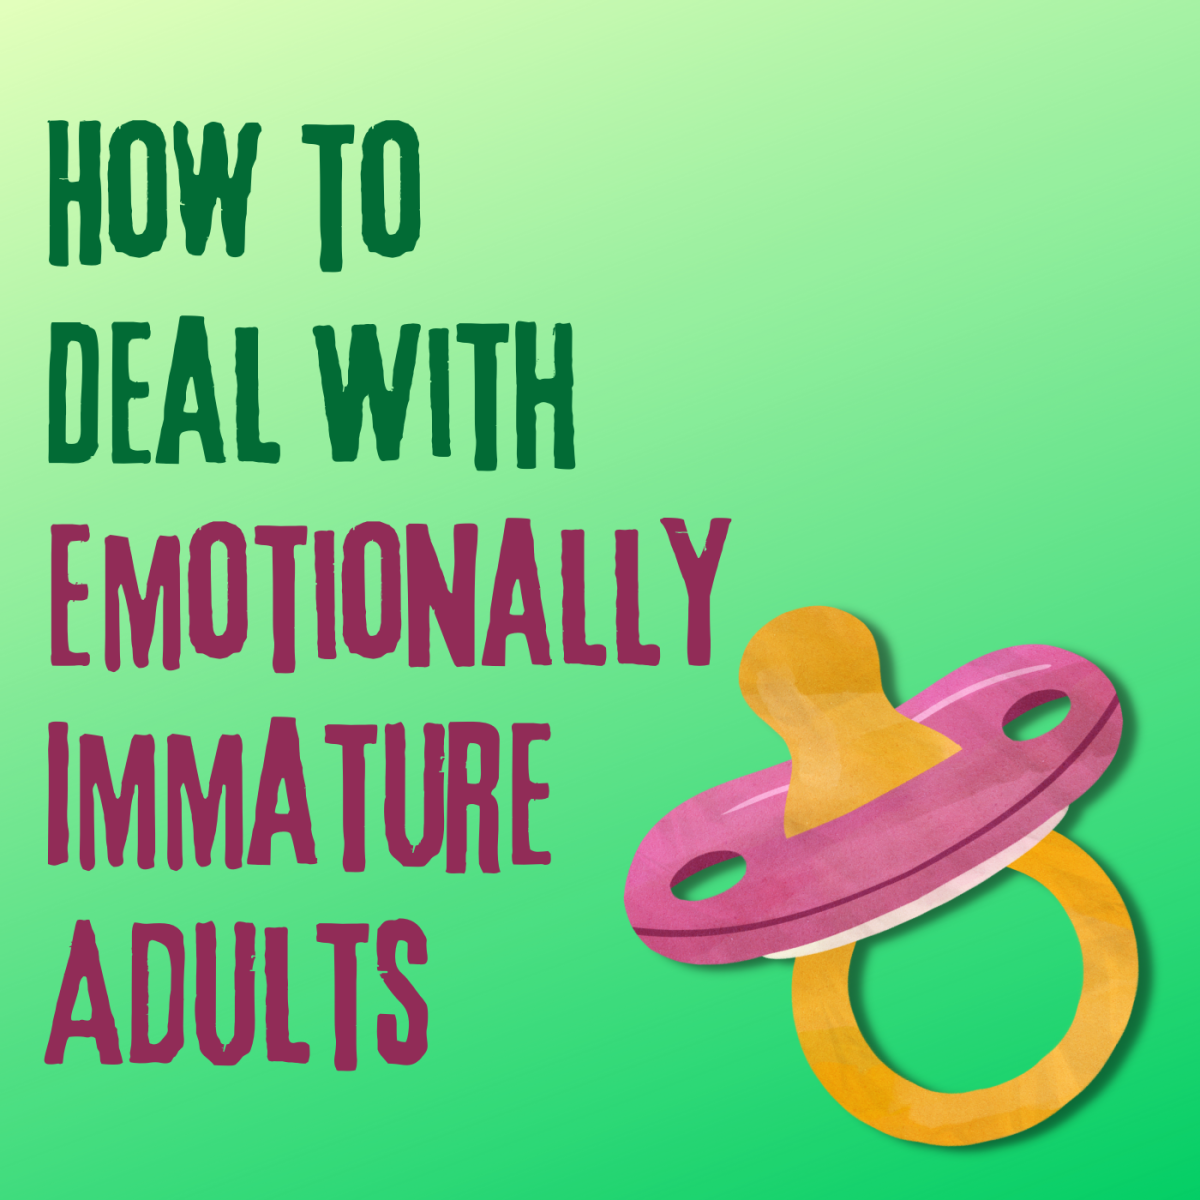 Is there a childish grown-up in your life? Get advice on how to deal with their immature behavior.